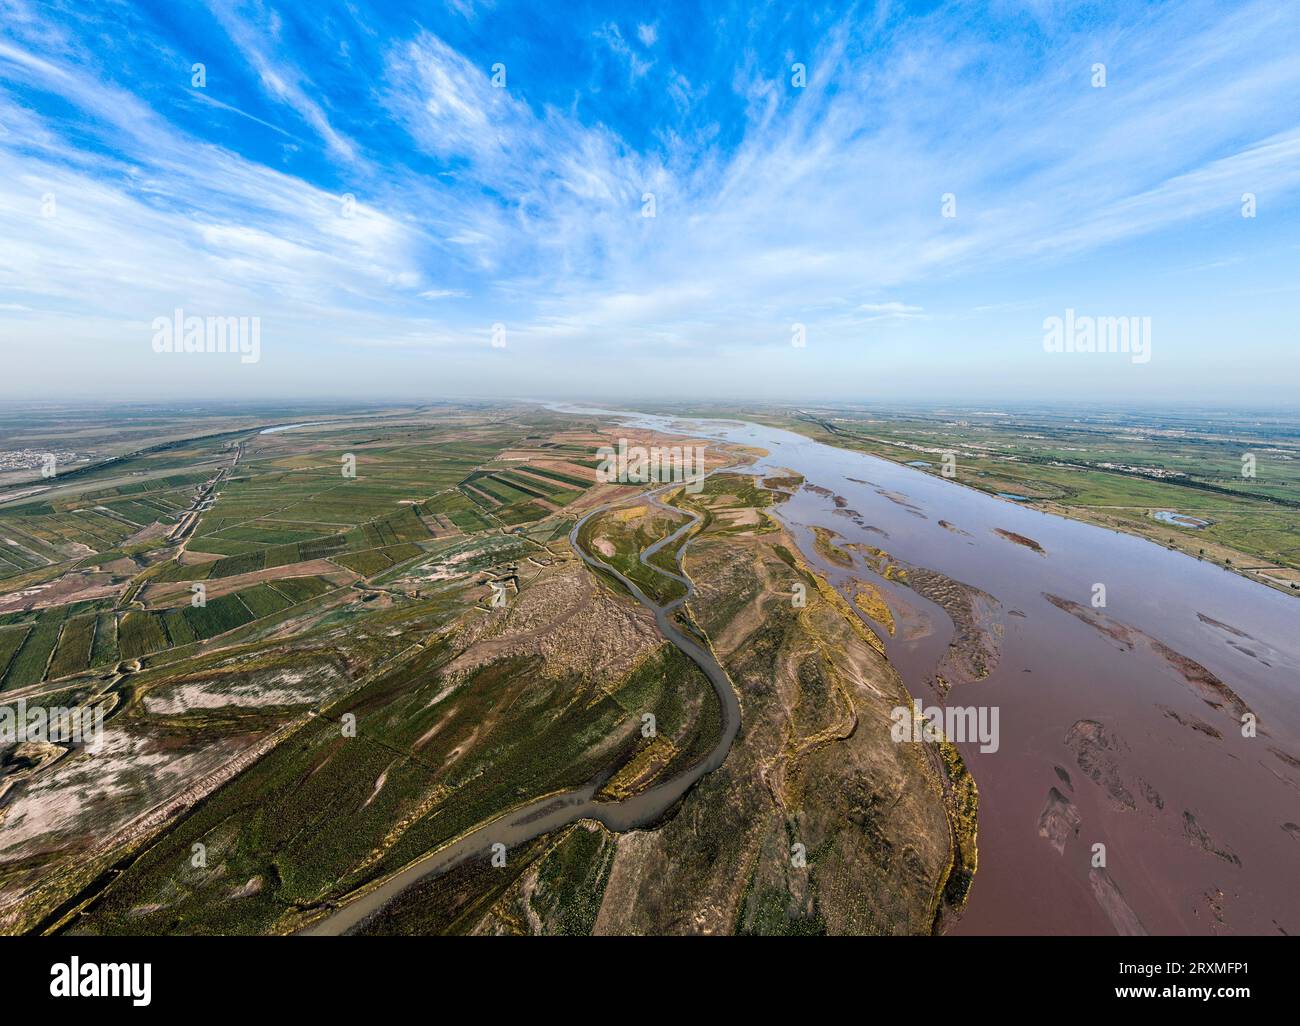 (230926) -- BAYANNUR, Sept. 26, 2023 (Xinhua) -- This aerial photo taken on Sept. 15, 2023 shows a view of the Yellow River in Shuanghe Town of Linhe District in Bayannur, north China's Inner Mongolia Autonomous Region.  The Hetao Irrigation Area, located in Bayannur, north China's Inner Mongolia Autonomous Region, has been diverting water from the Yellow River for irrigate since the Qin Dynasty (221 B.C.-206 B.C.). The current irrigation area stands at 11.54 million mu.     The 2,200-year-old irrigation project, included in the World Heritage Irrigation Structures in 2019, uses gravity to tra Stock Photo